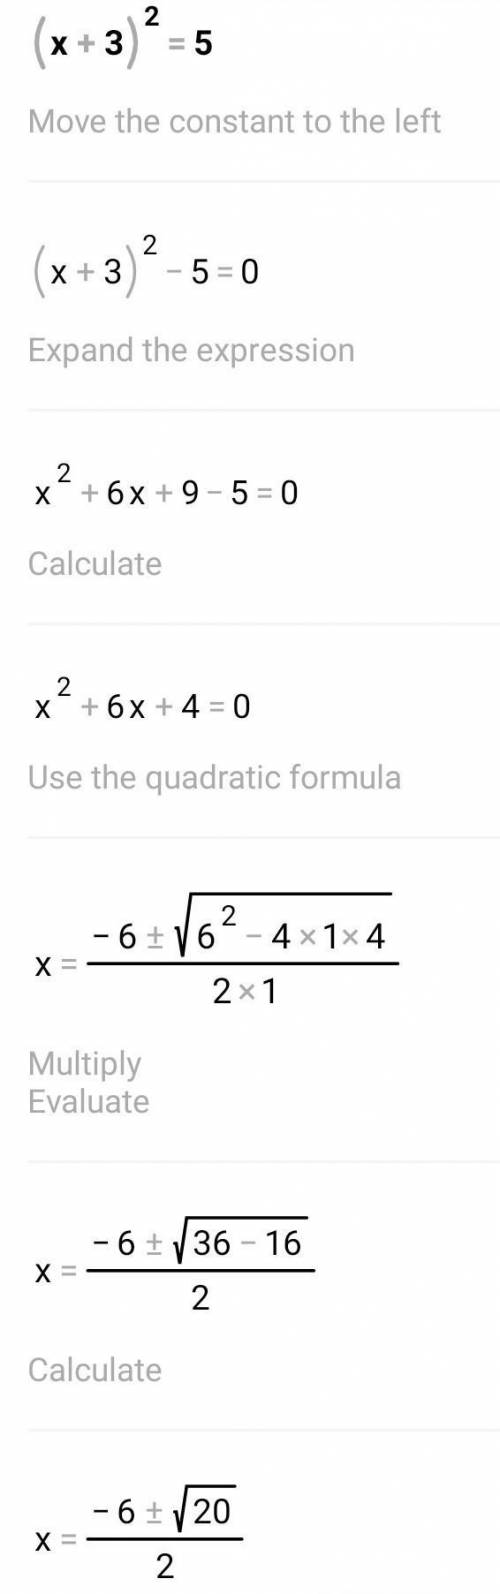 Can x = 2i be a solution for (x+3)^2 =5